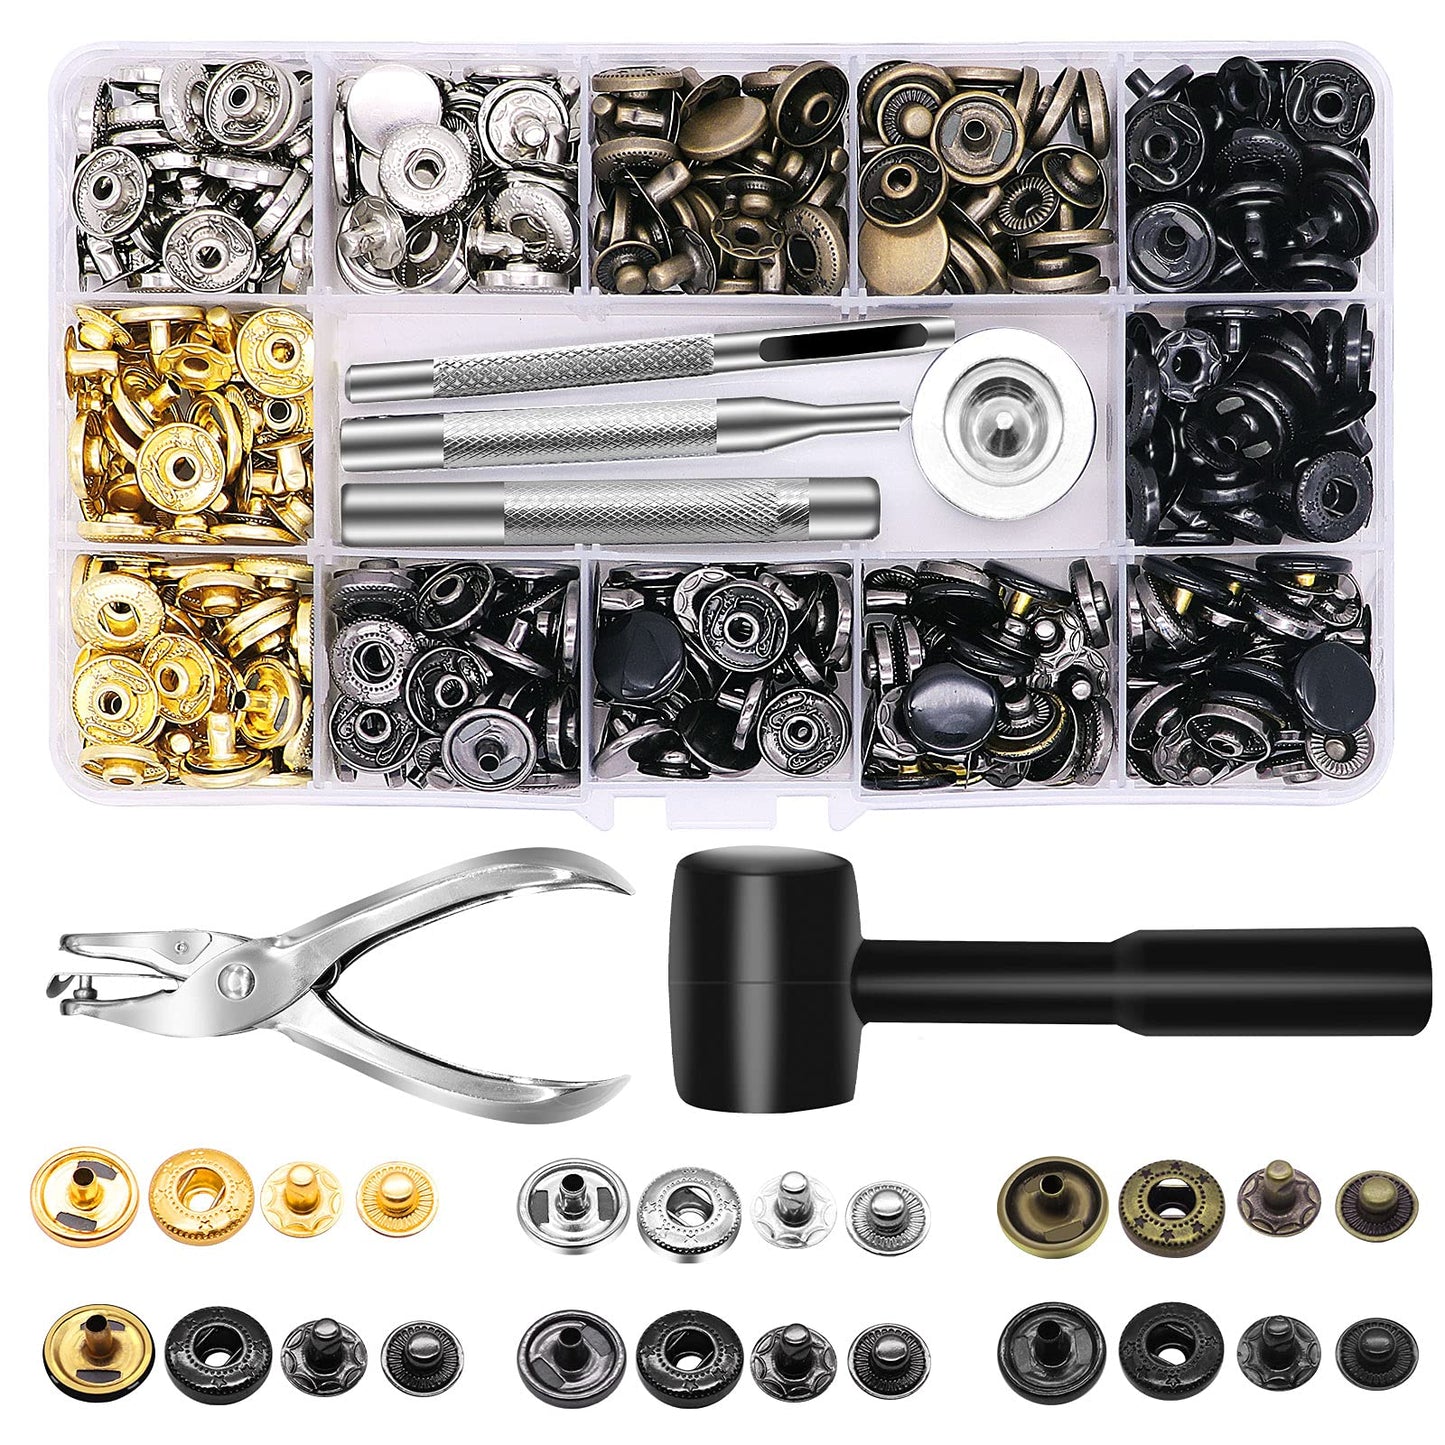 Alritz 120 Set Leather Snap Fasteners Kit with Hammer Puncher, 12.5mm Metal Button Snaps Press Studs with 4 Setter Tools for Clothes, Jackets, Jeans Wears, Bracelets, Bags